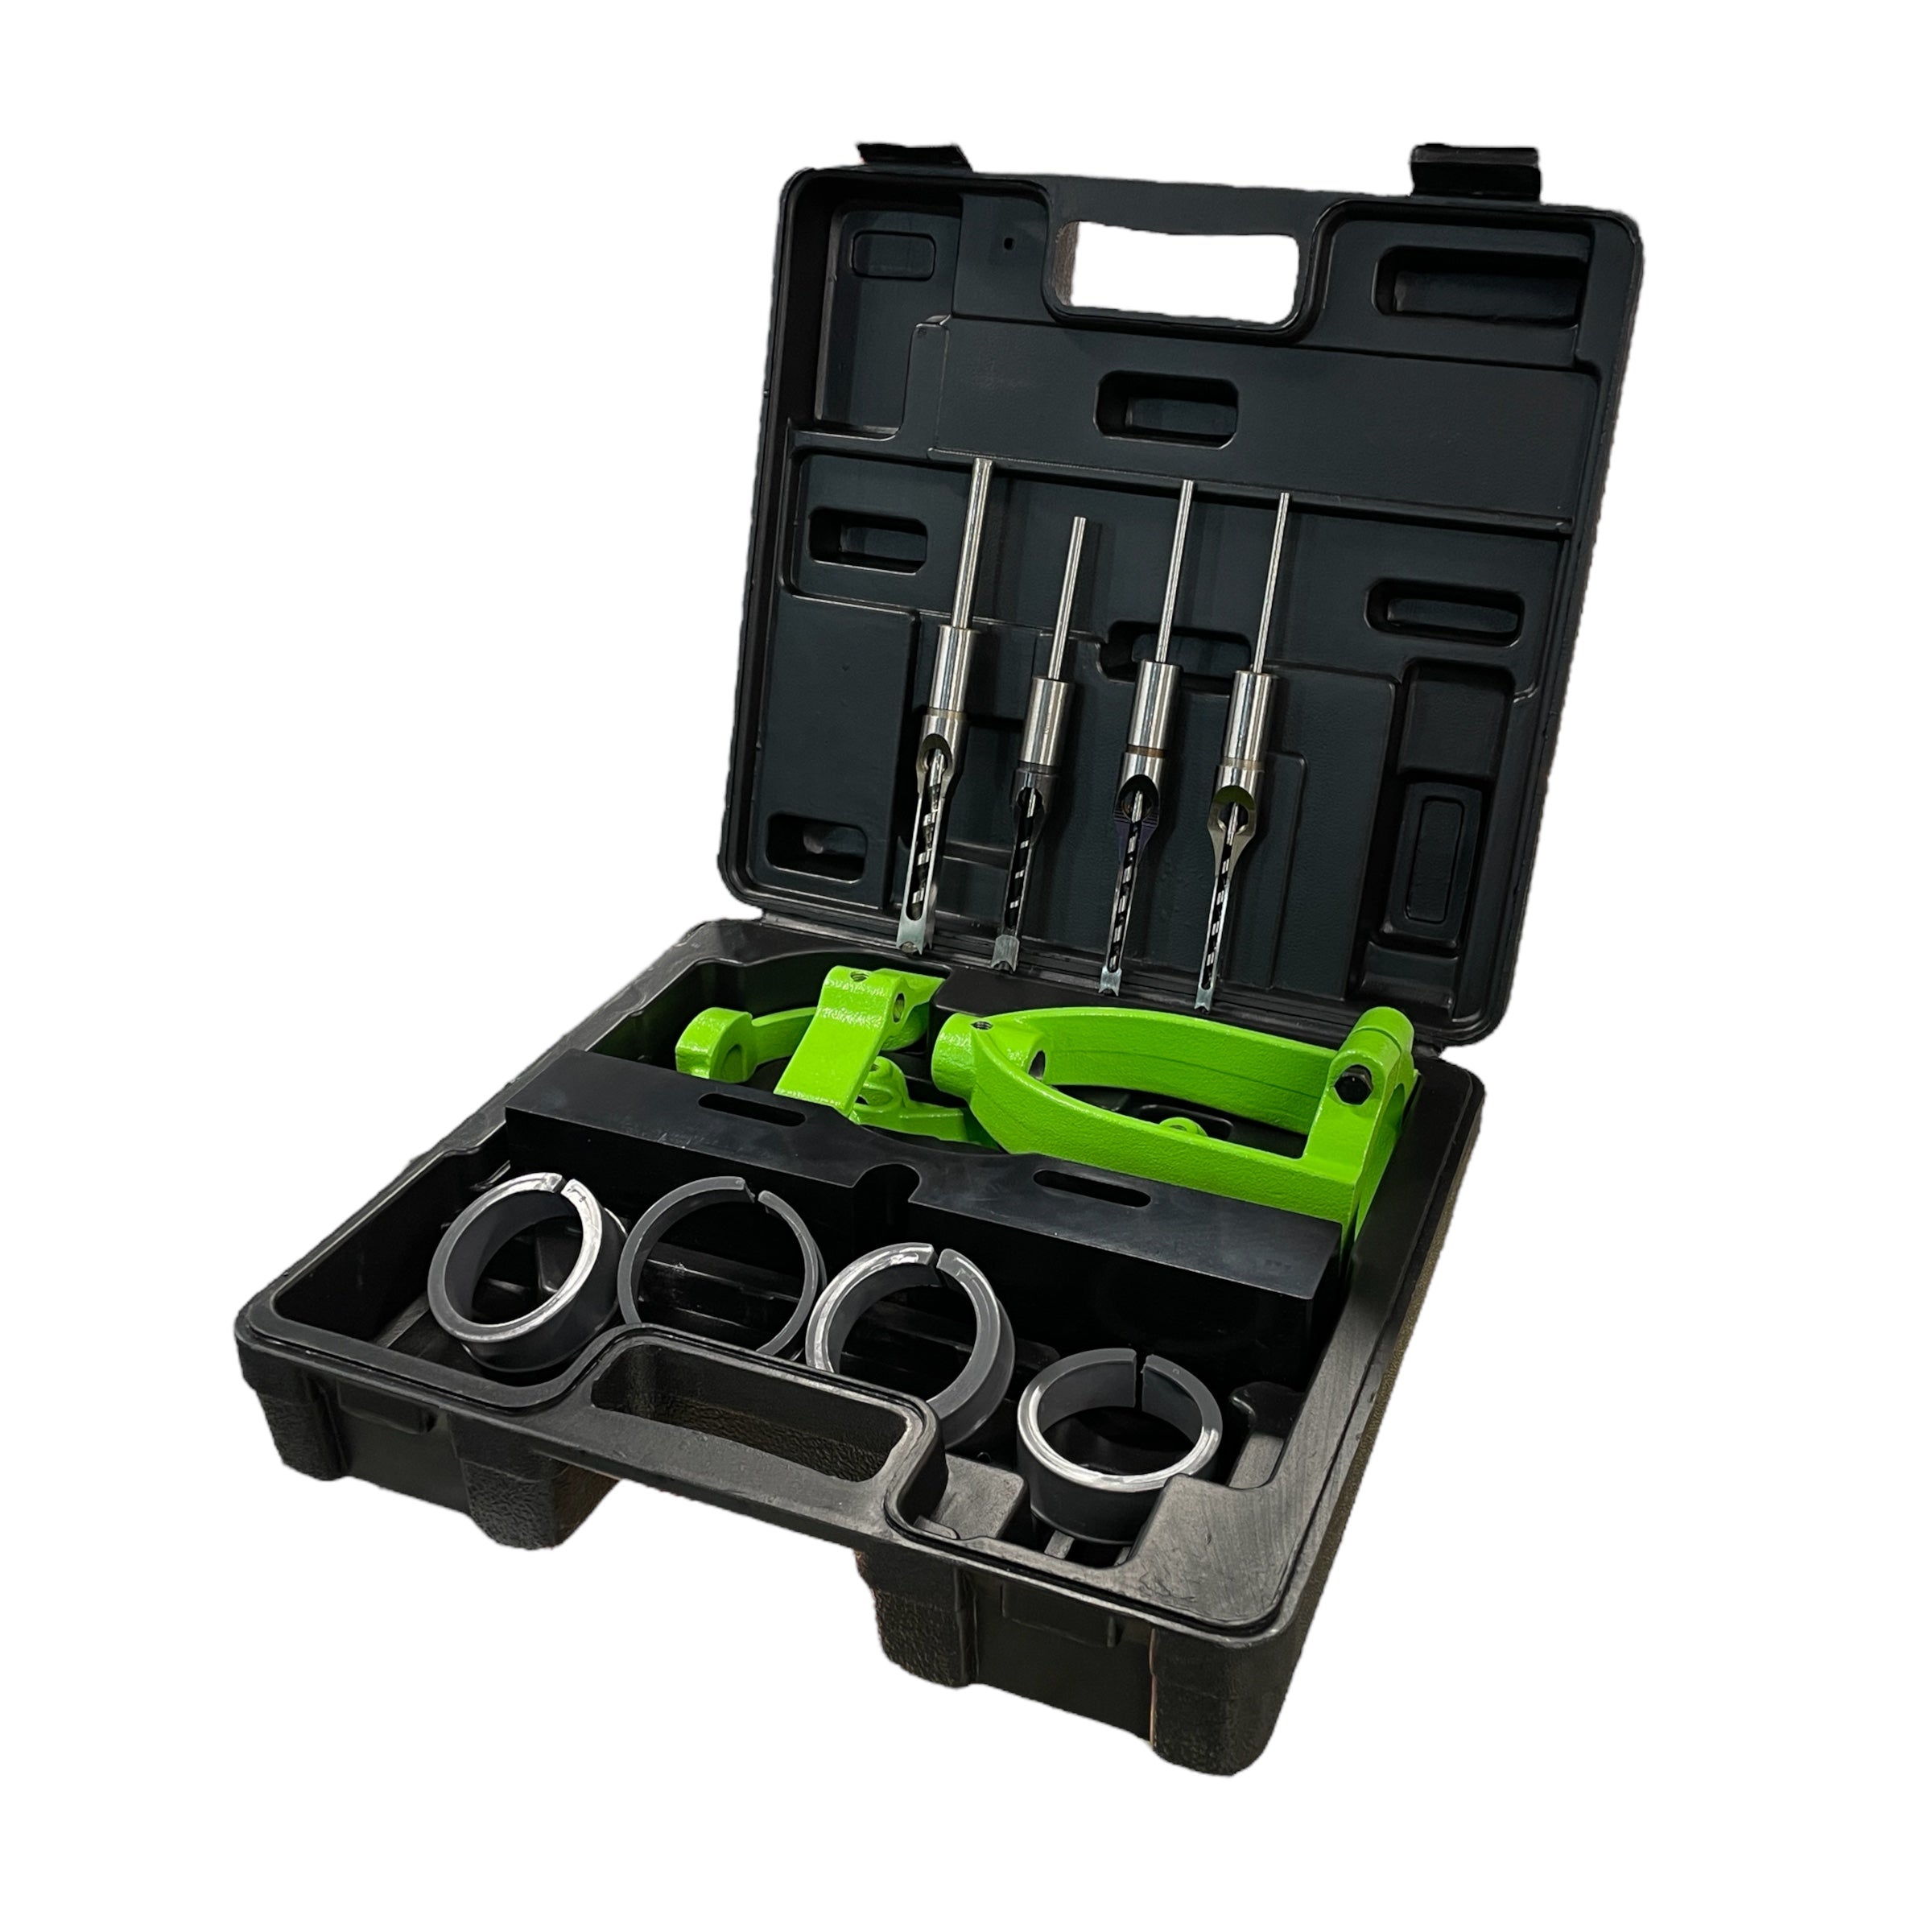 Mortising Kit WFT29-201 by Woodfast